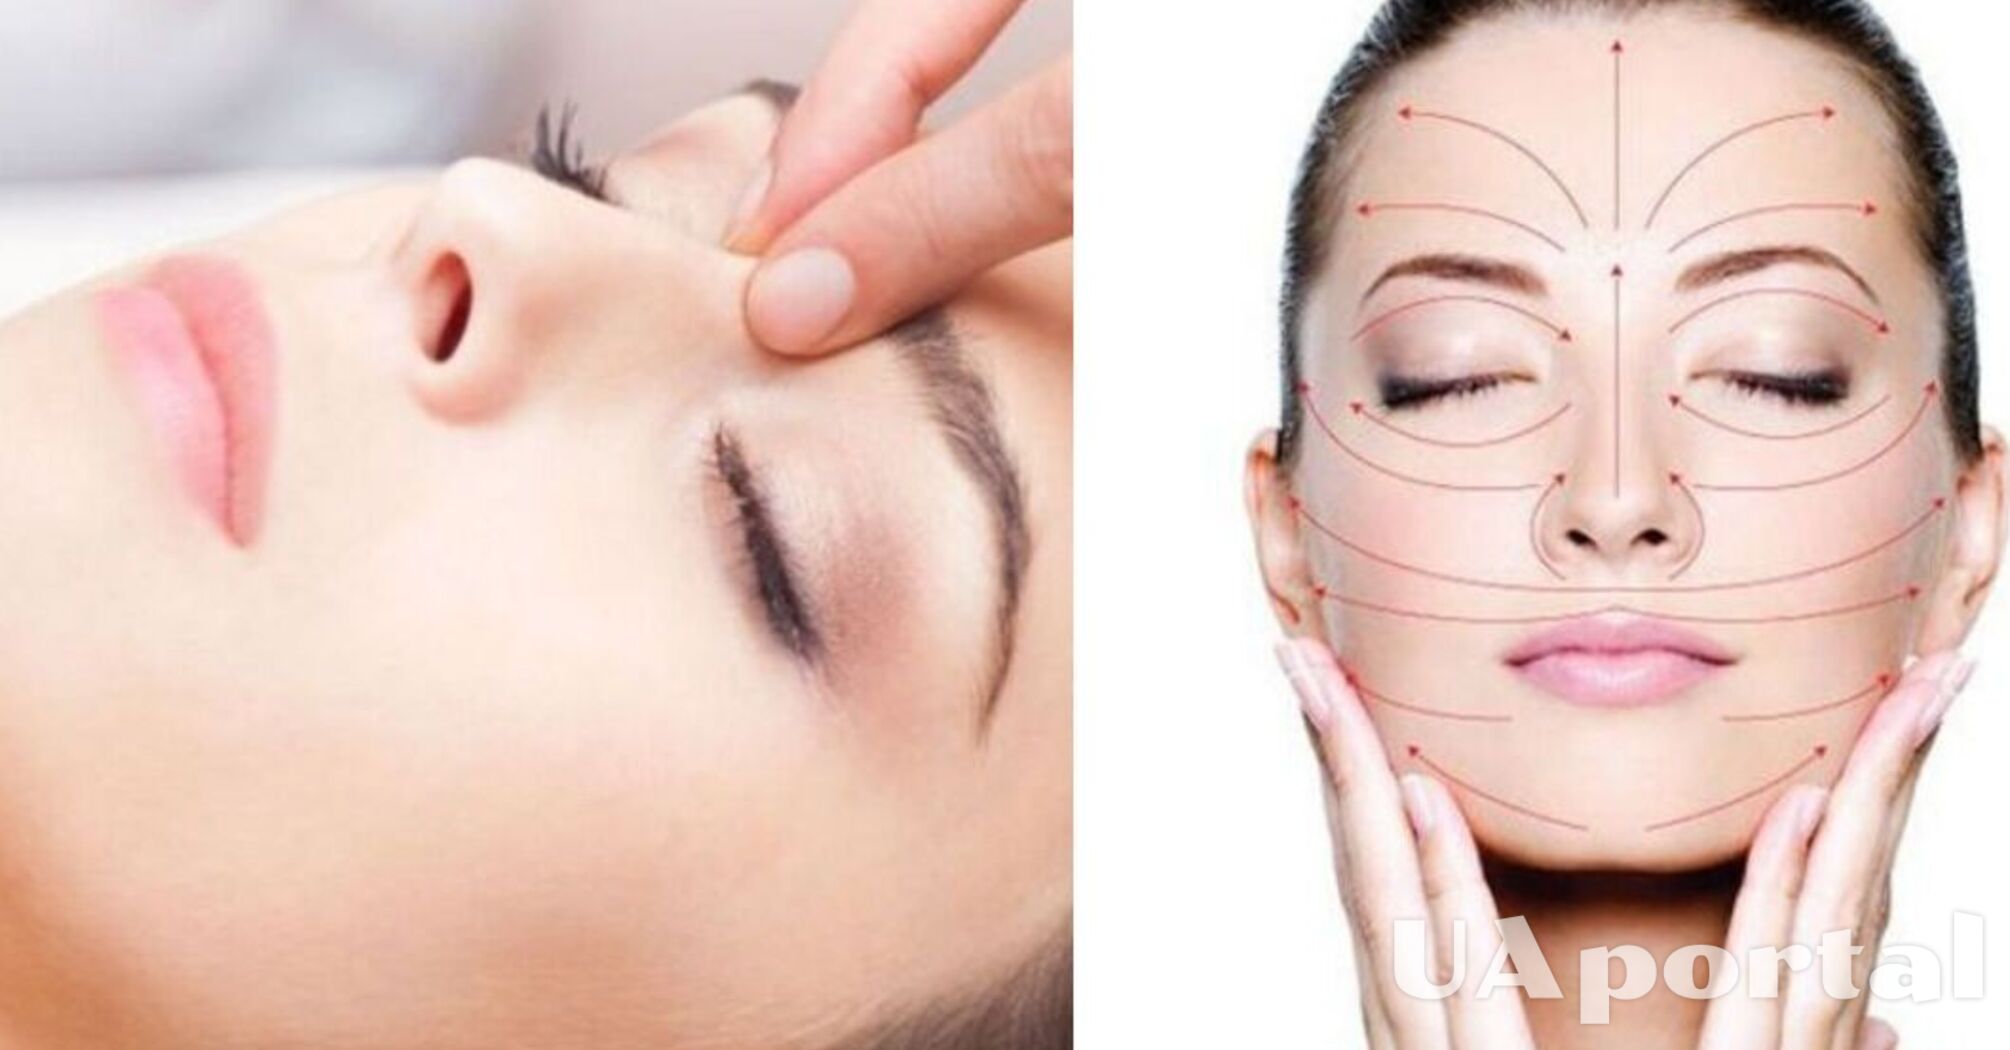 Tightens the skin and improves complexion: how to perform a facial massage to get a lifting effect